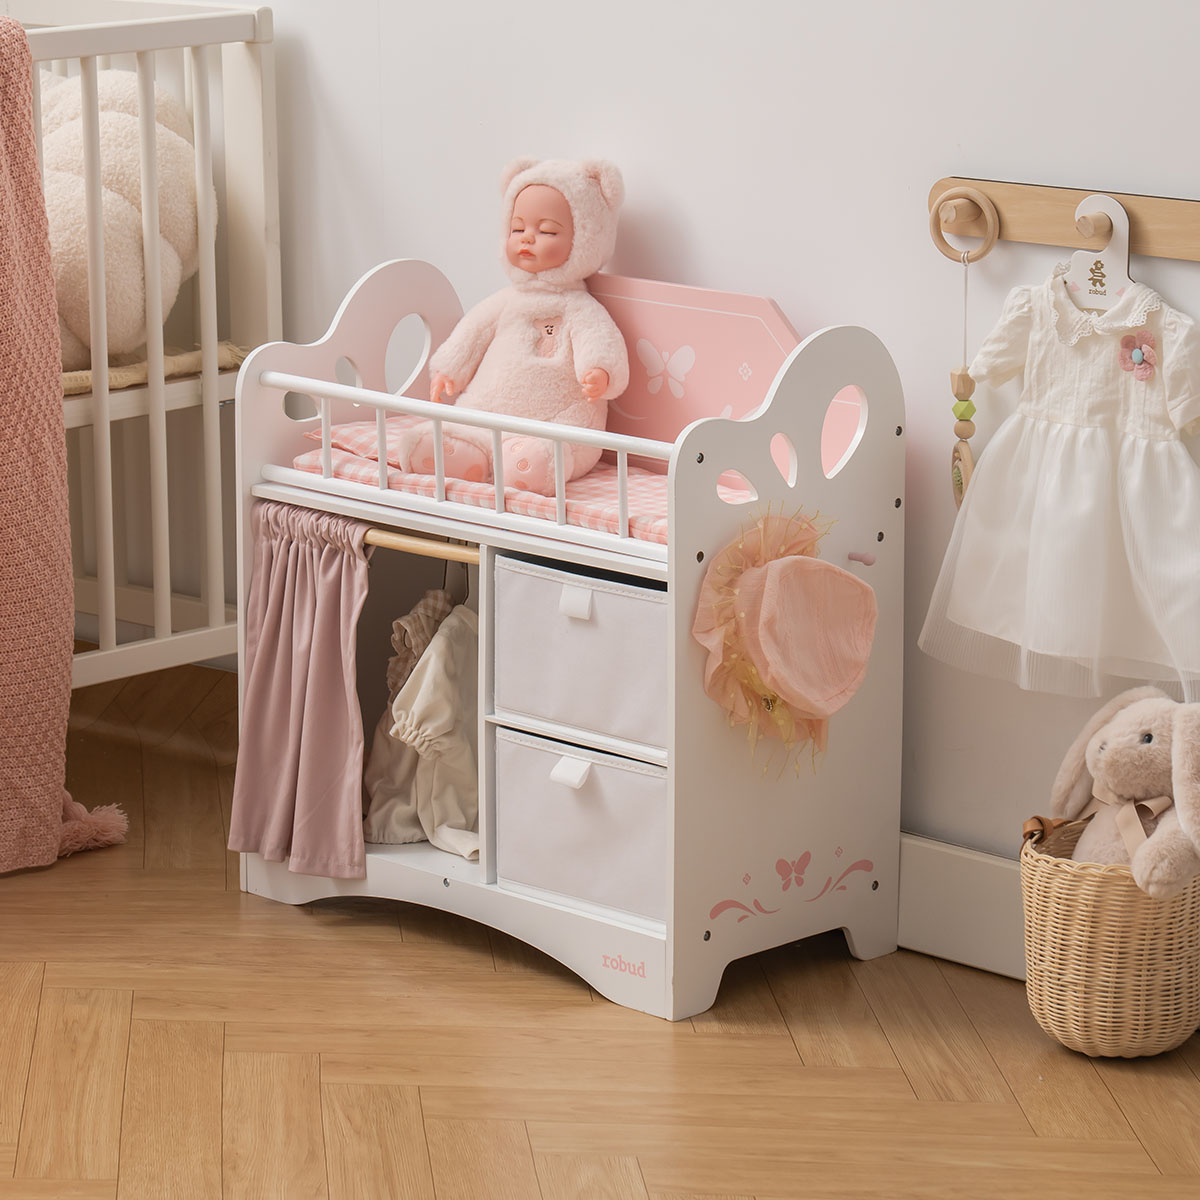 ROBUD Doll Bed Furniture with Clothes